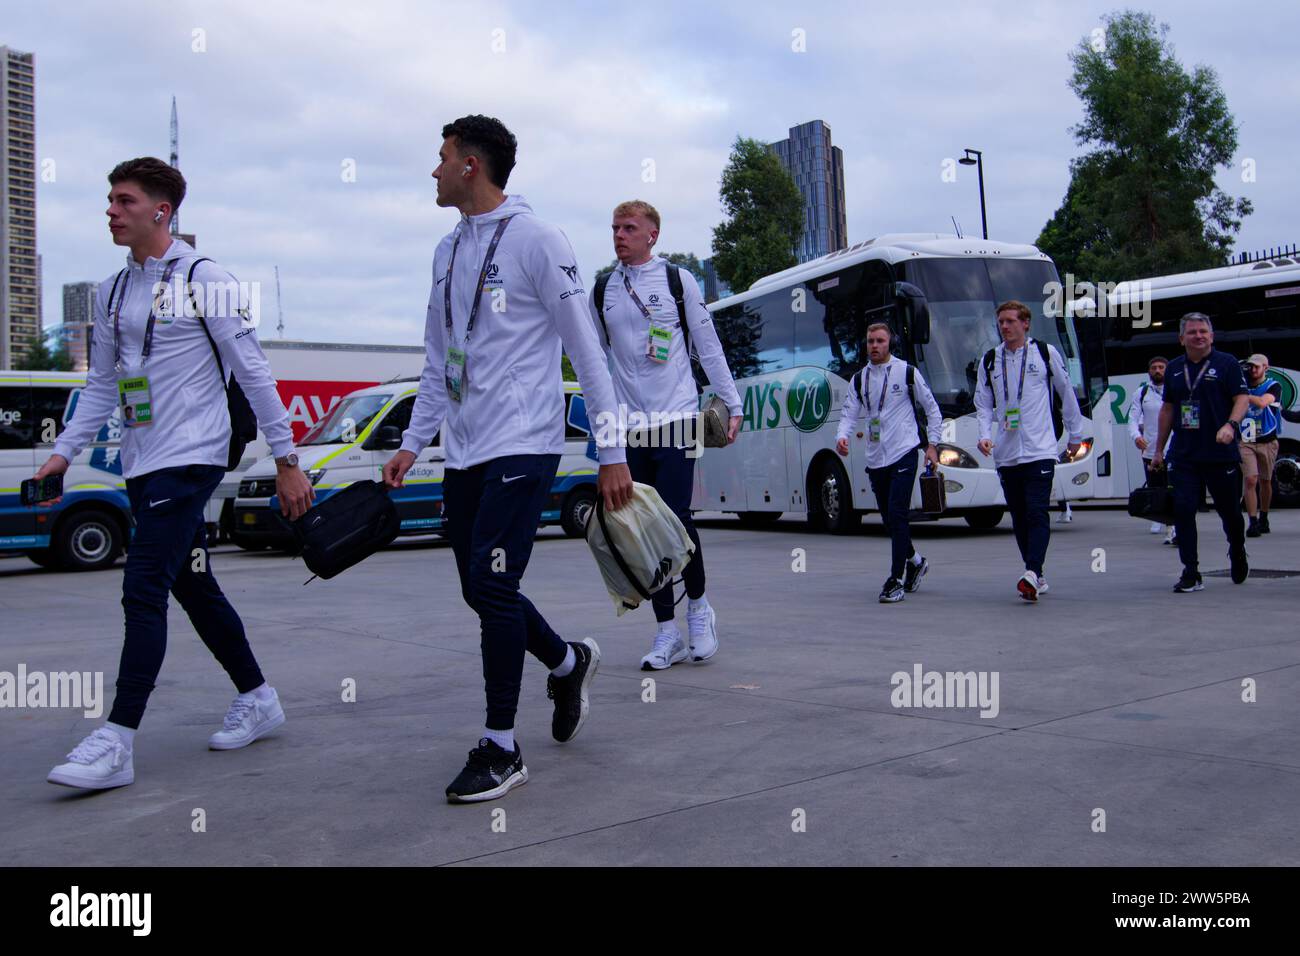 Sydney, Australia. 21st Mar, 2024. Australian Socceroos arrive before the FIFA World Cup 2026 Qualifier match between Australia and Lebanon at Western Sydney Stadium on March 21, 2024 in Sydney, Australia Credit: IOIO IMAGES/Alamy Live News Stock Photo